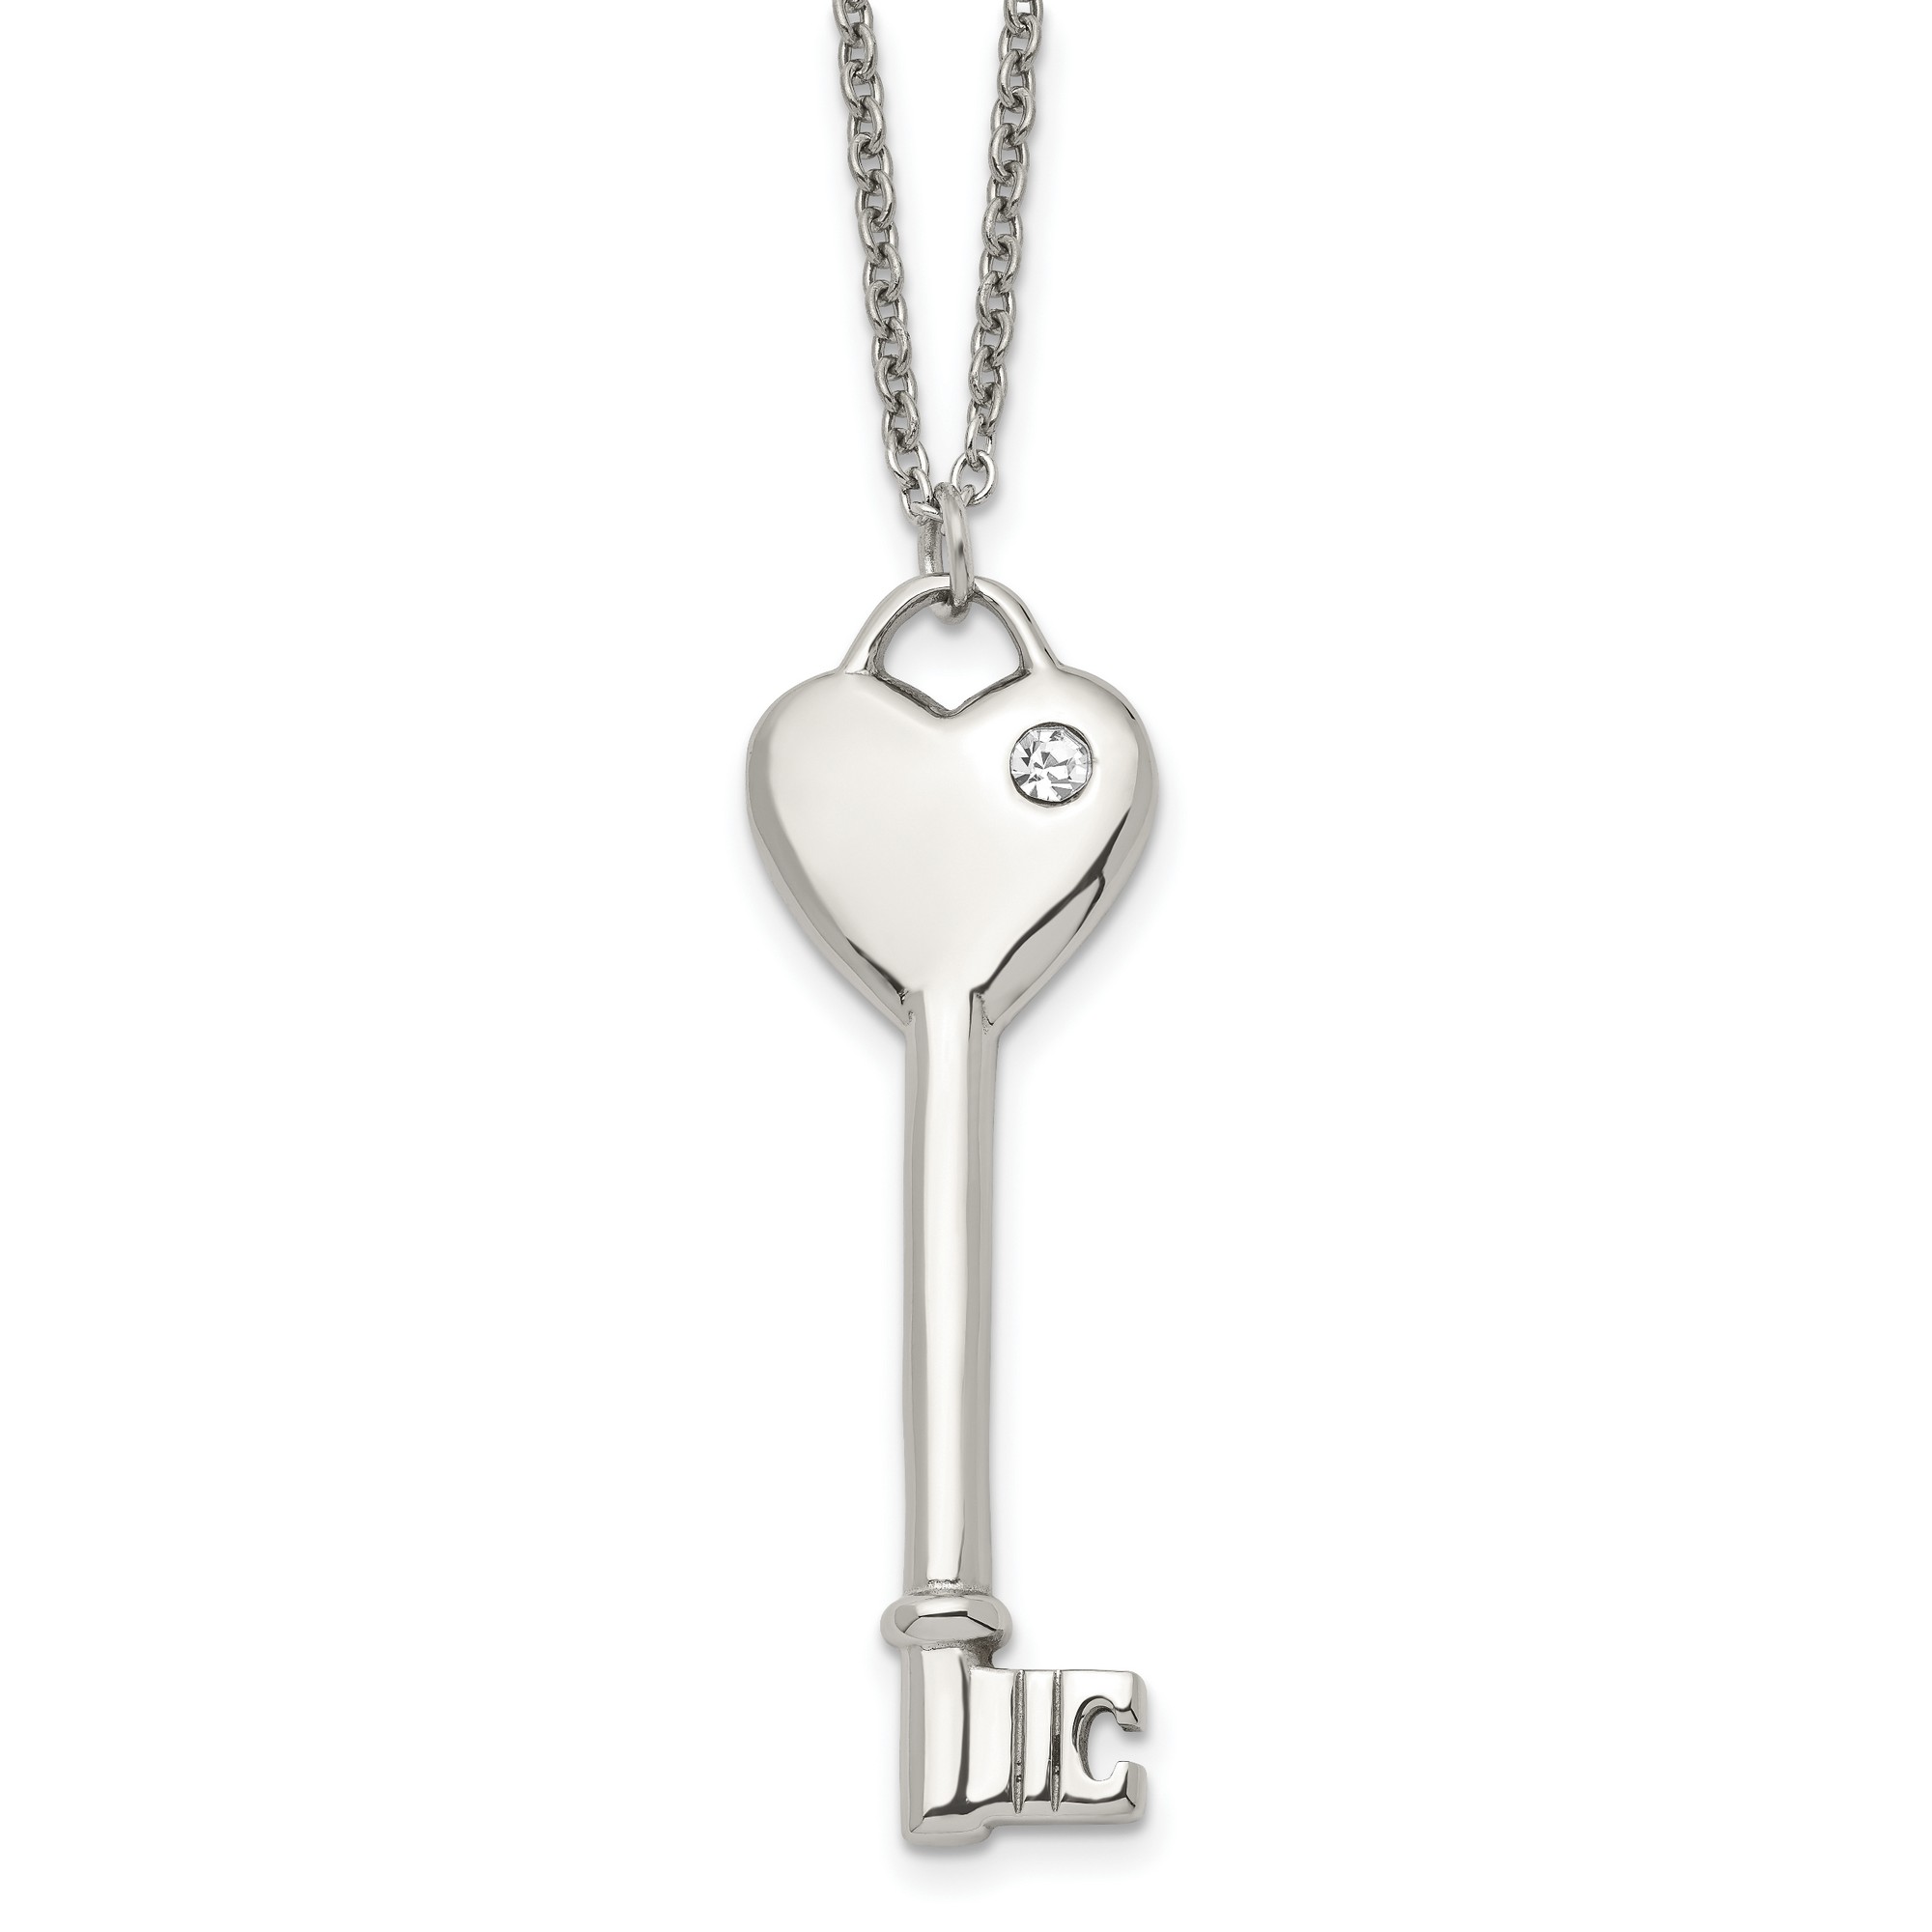 Stainless Steel CZ Heart Lock and Key Pendant Chain Necklace 